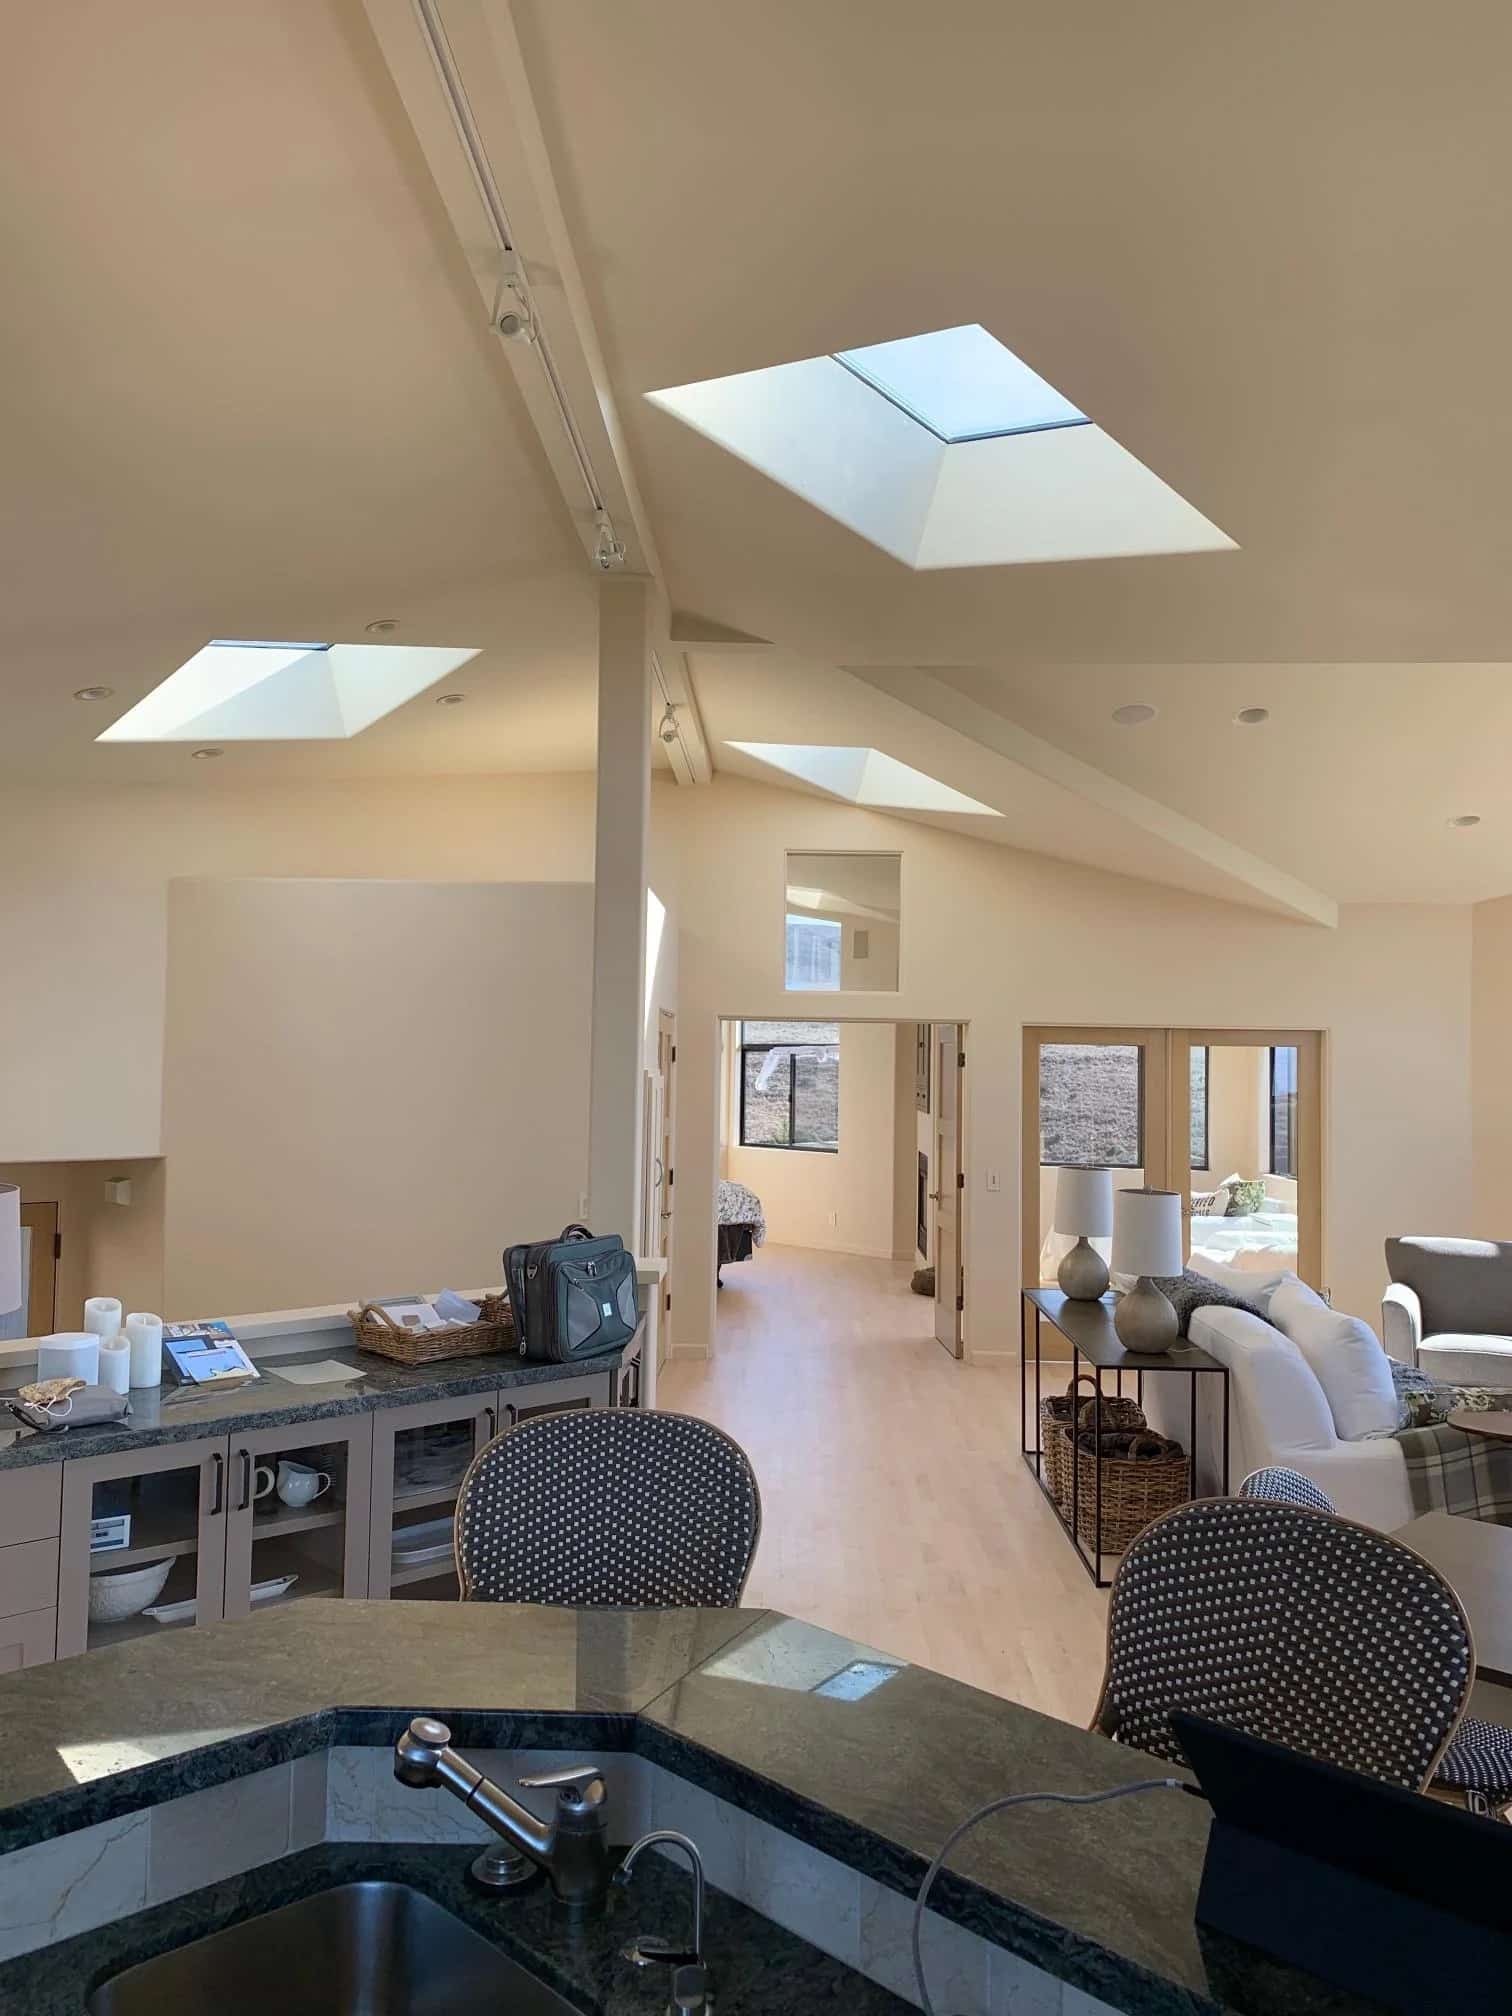 What is the Best Window Film for Skylights? Find out which film is best for you. Get a free estimate for San Francisco Bay Area skylights from ClimatePro.